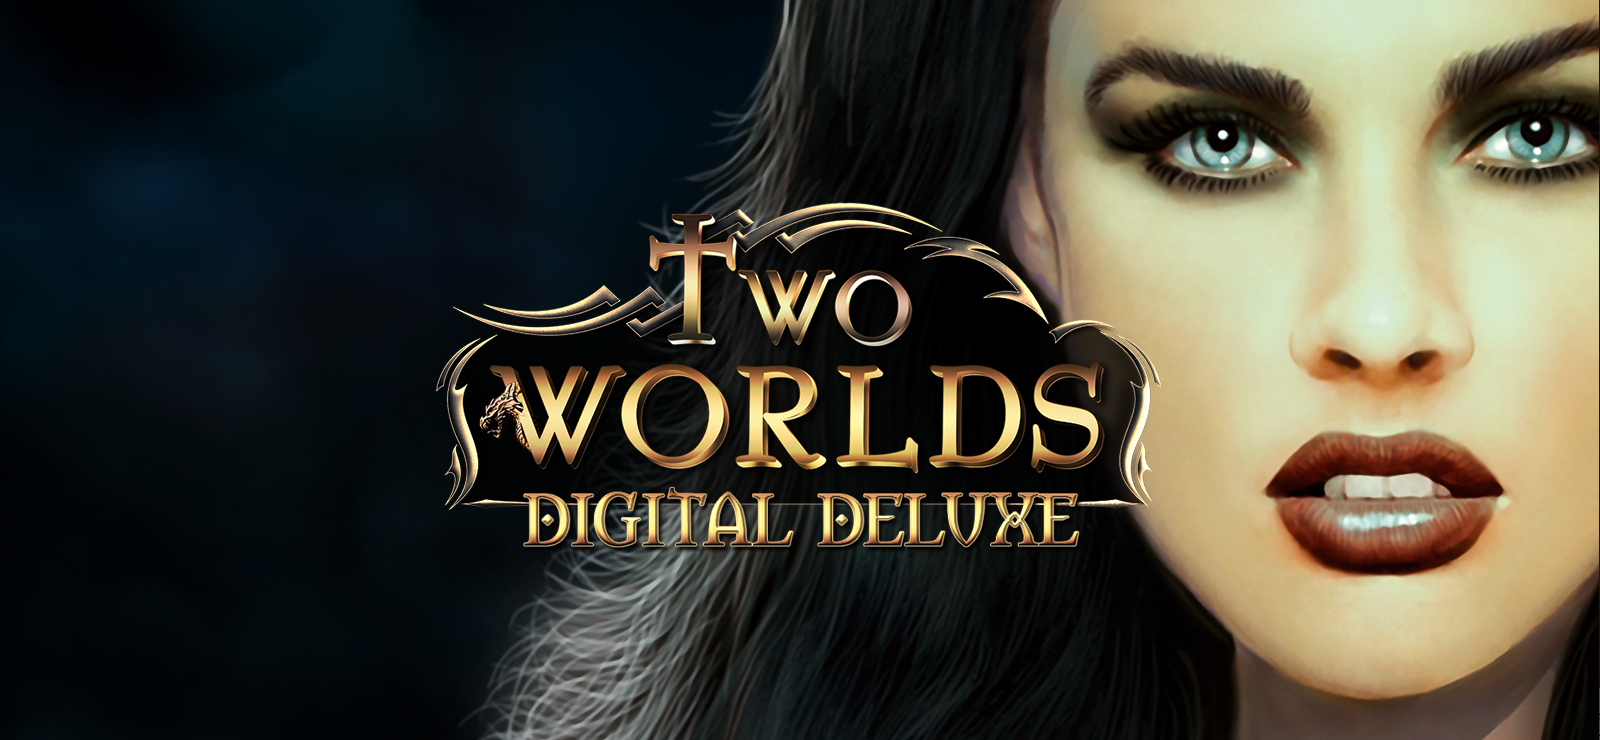 Two Worlds Digital Deluxe Content